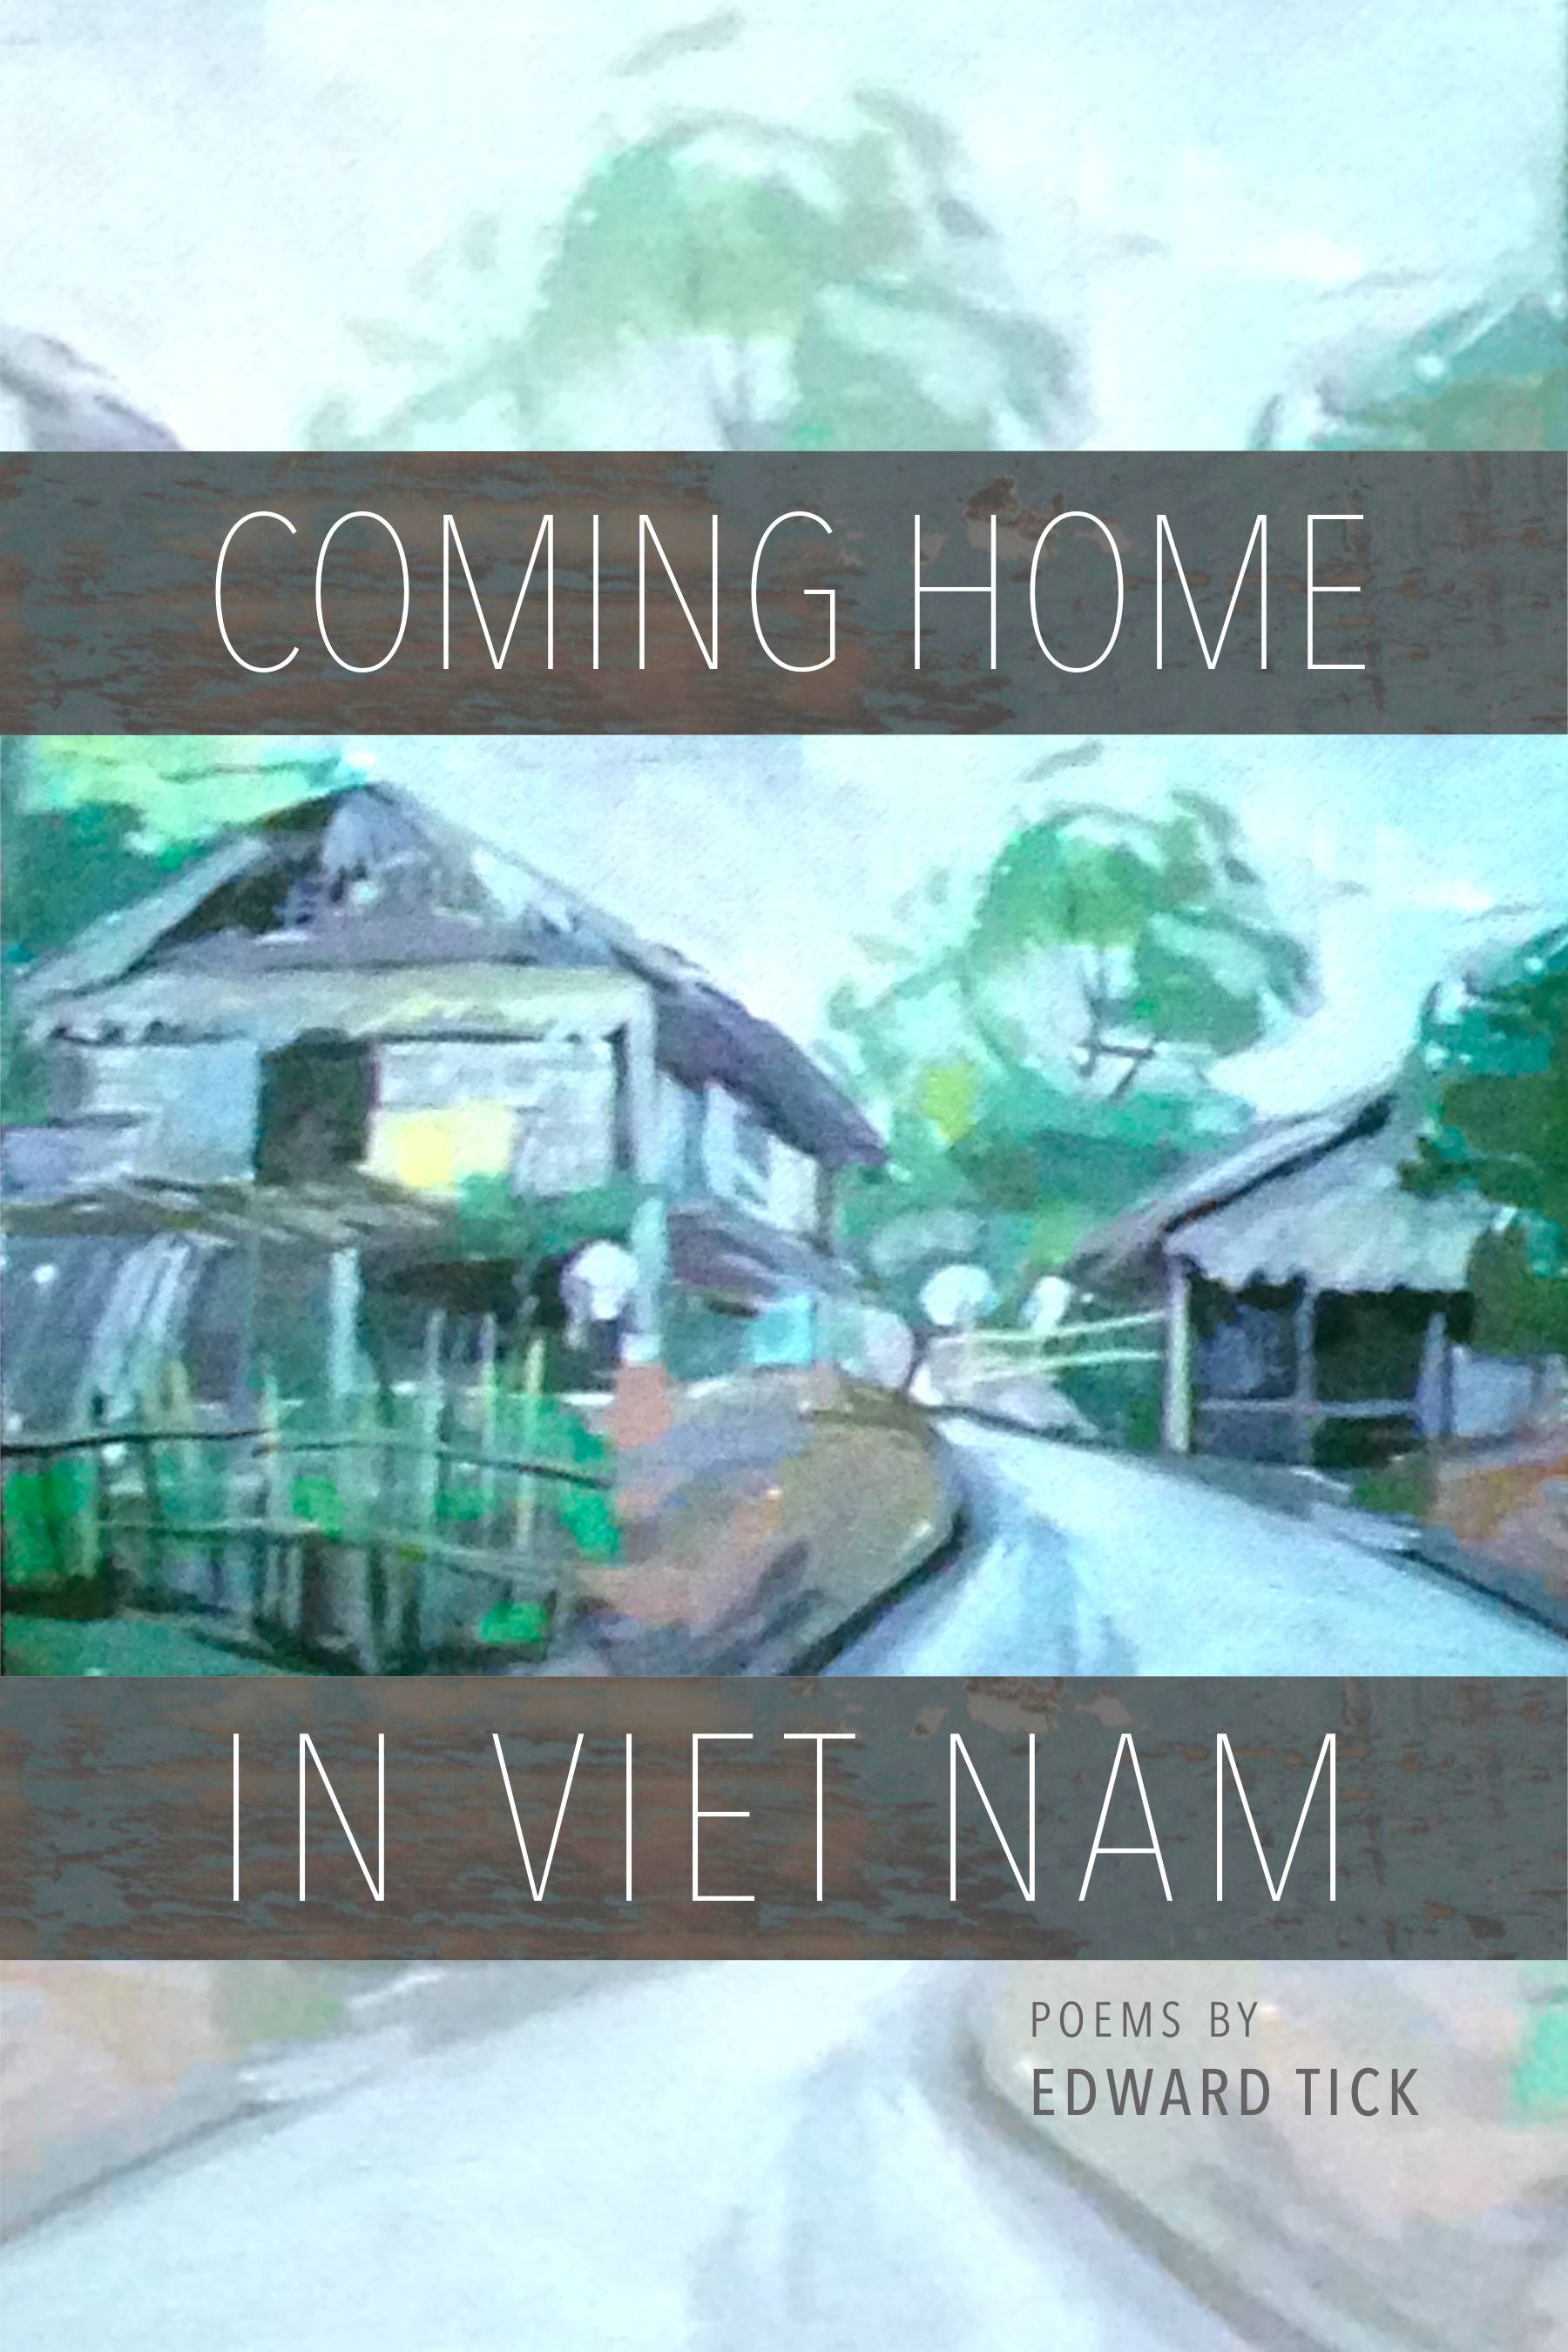 Coming Home In Viet Nam